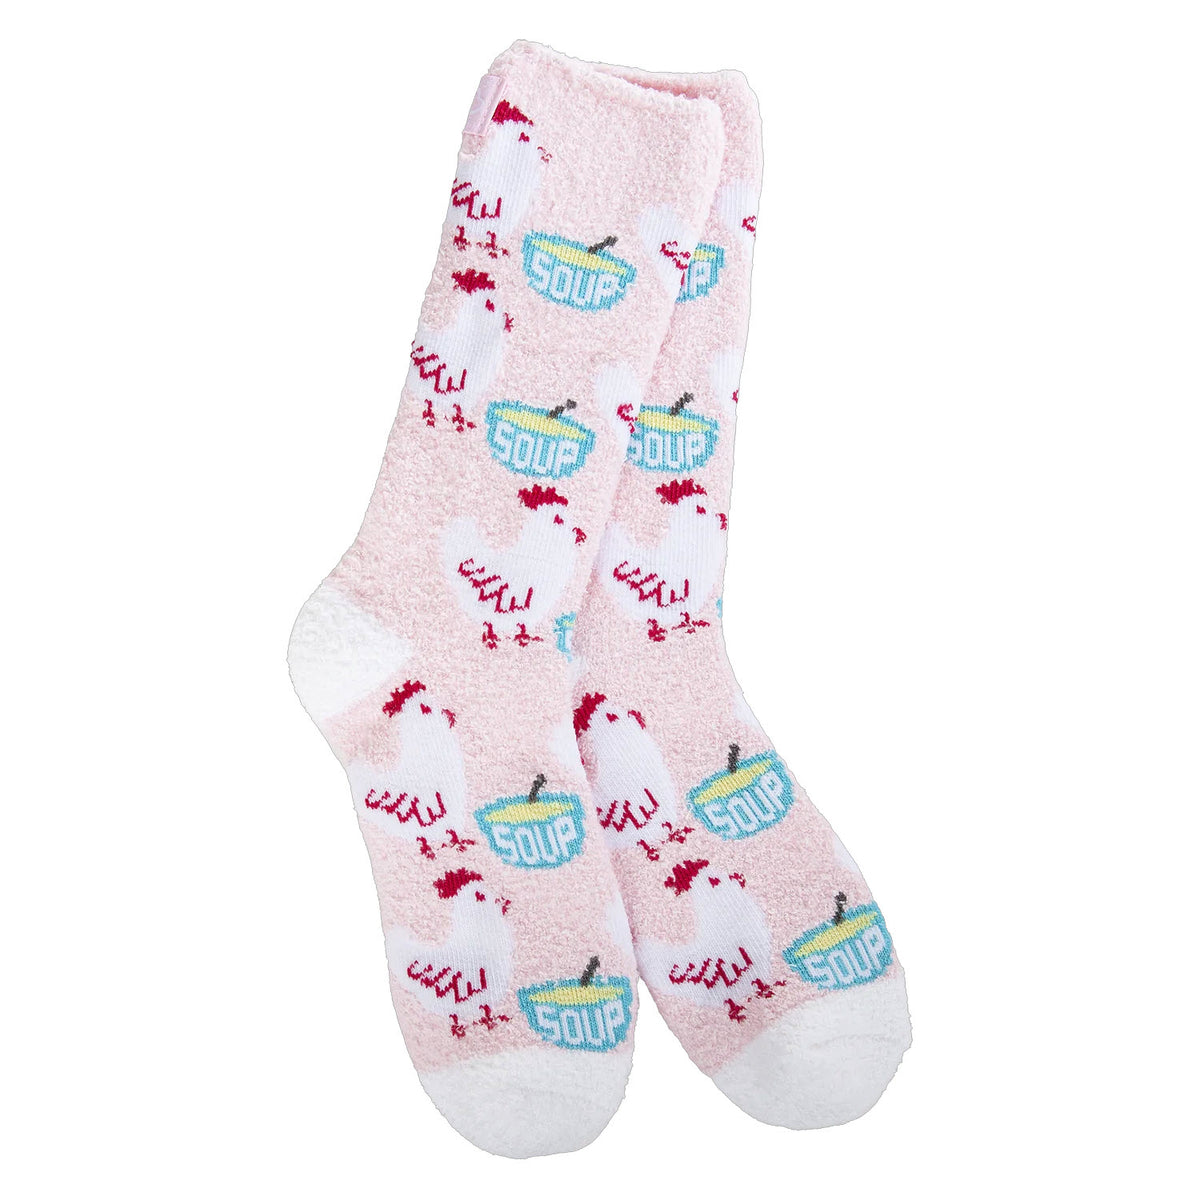 A pair of Worlds Softest Cozy Crew Socks Chicken Soup, featuring multiple &quot;soup&quot; and steaming bowl graphics in red and blue.